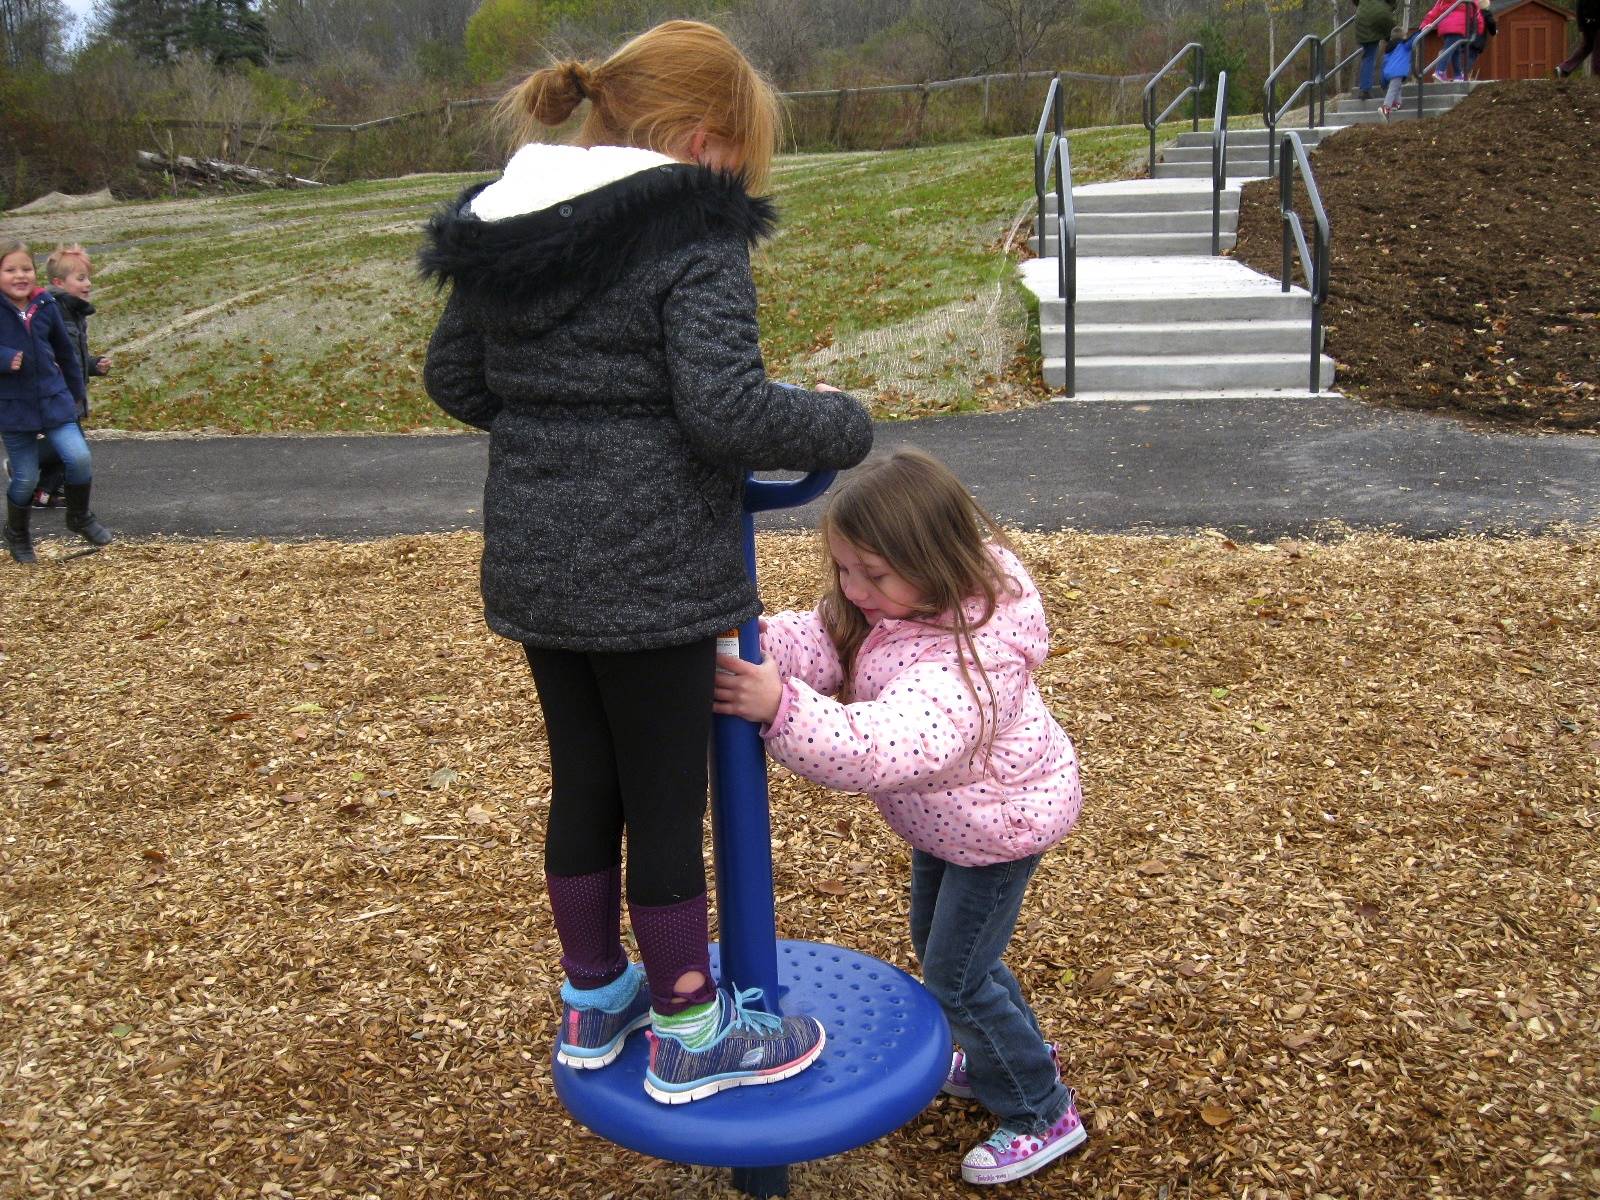 Cooperation! 1 student twirls another on the playground.